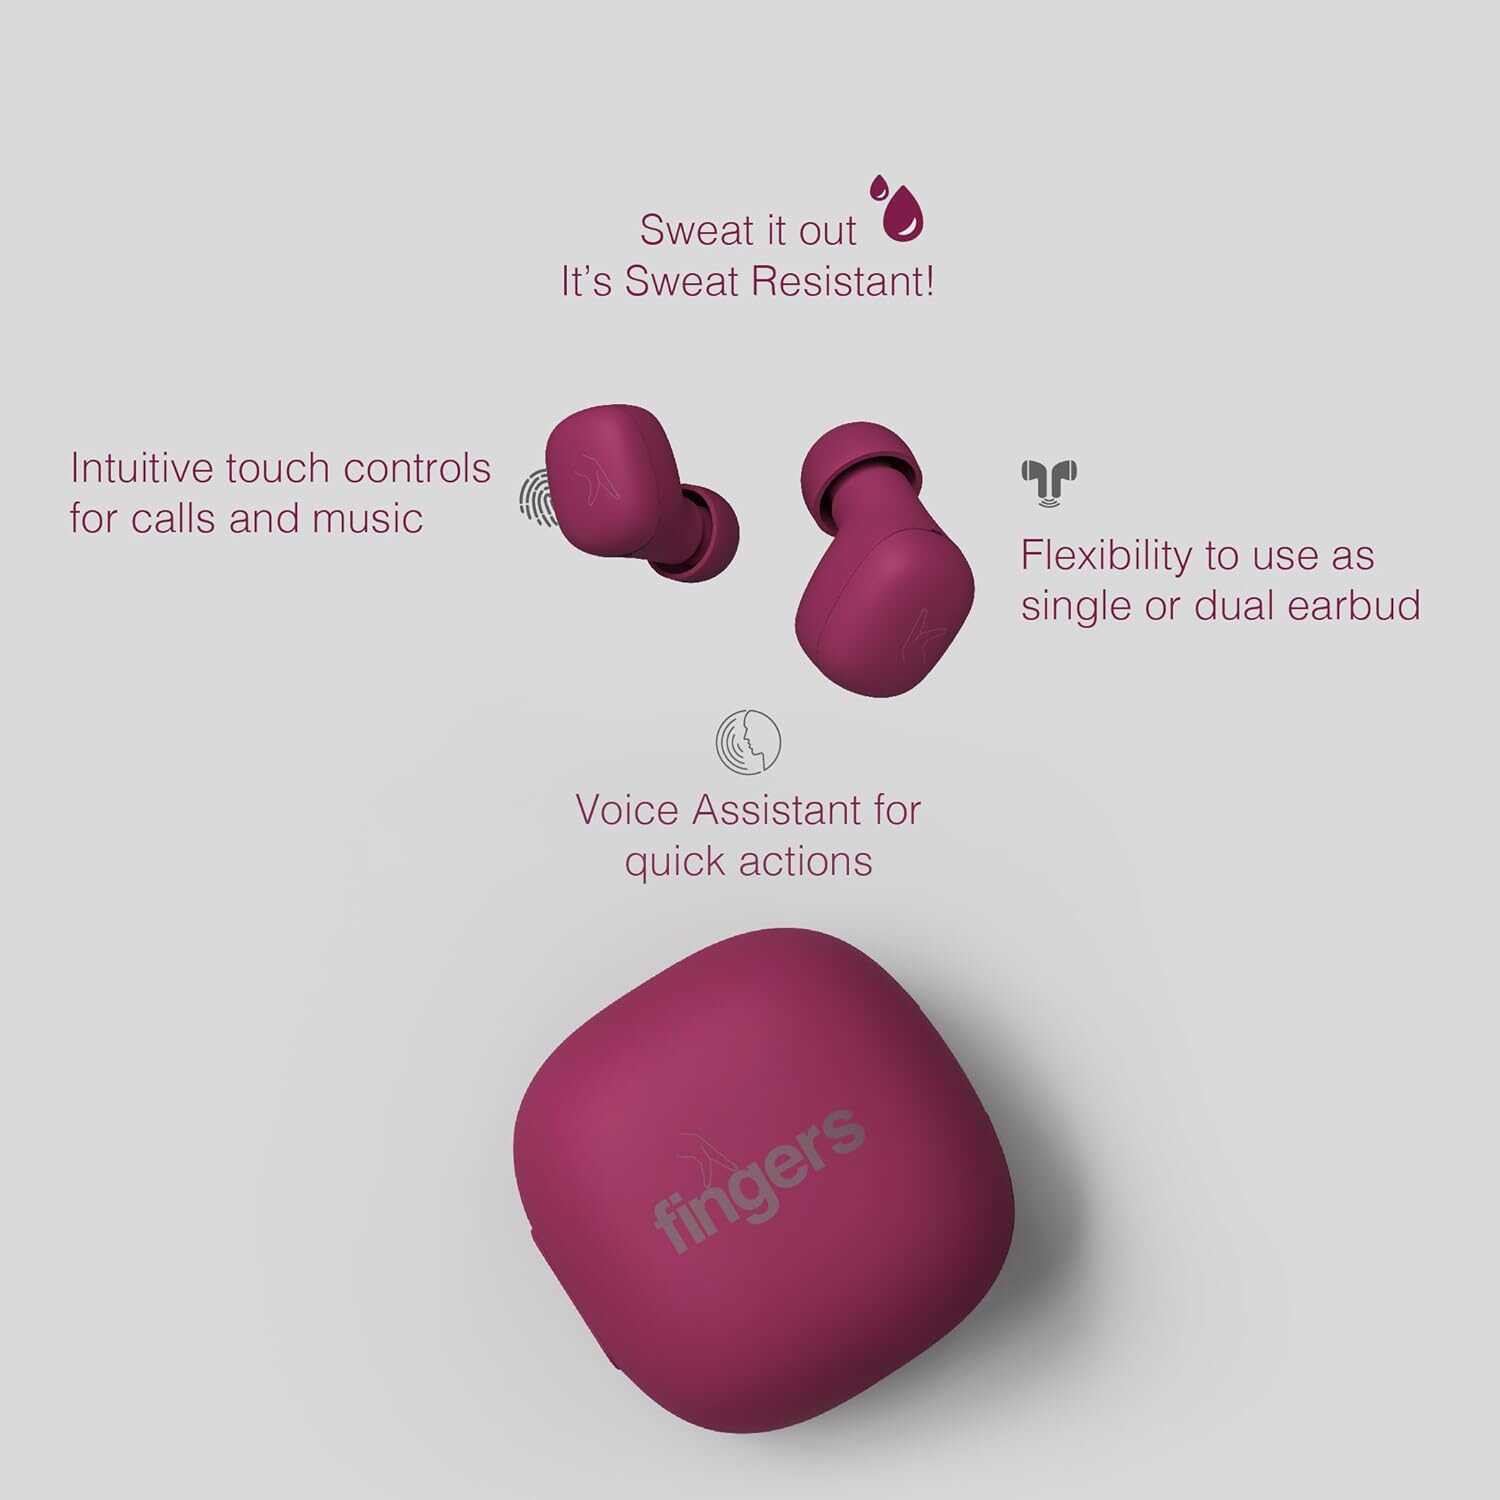 FINGERS SizeZero Pods2 World's Tiniest TWS Earbuds with 15-Hour Total Playtime, Quick Charge of 10 mins for 2-Hour Playtime, Built-in Mic with SNC™ Technology for Clear Calls (Plum)